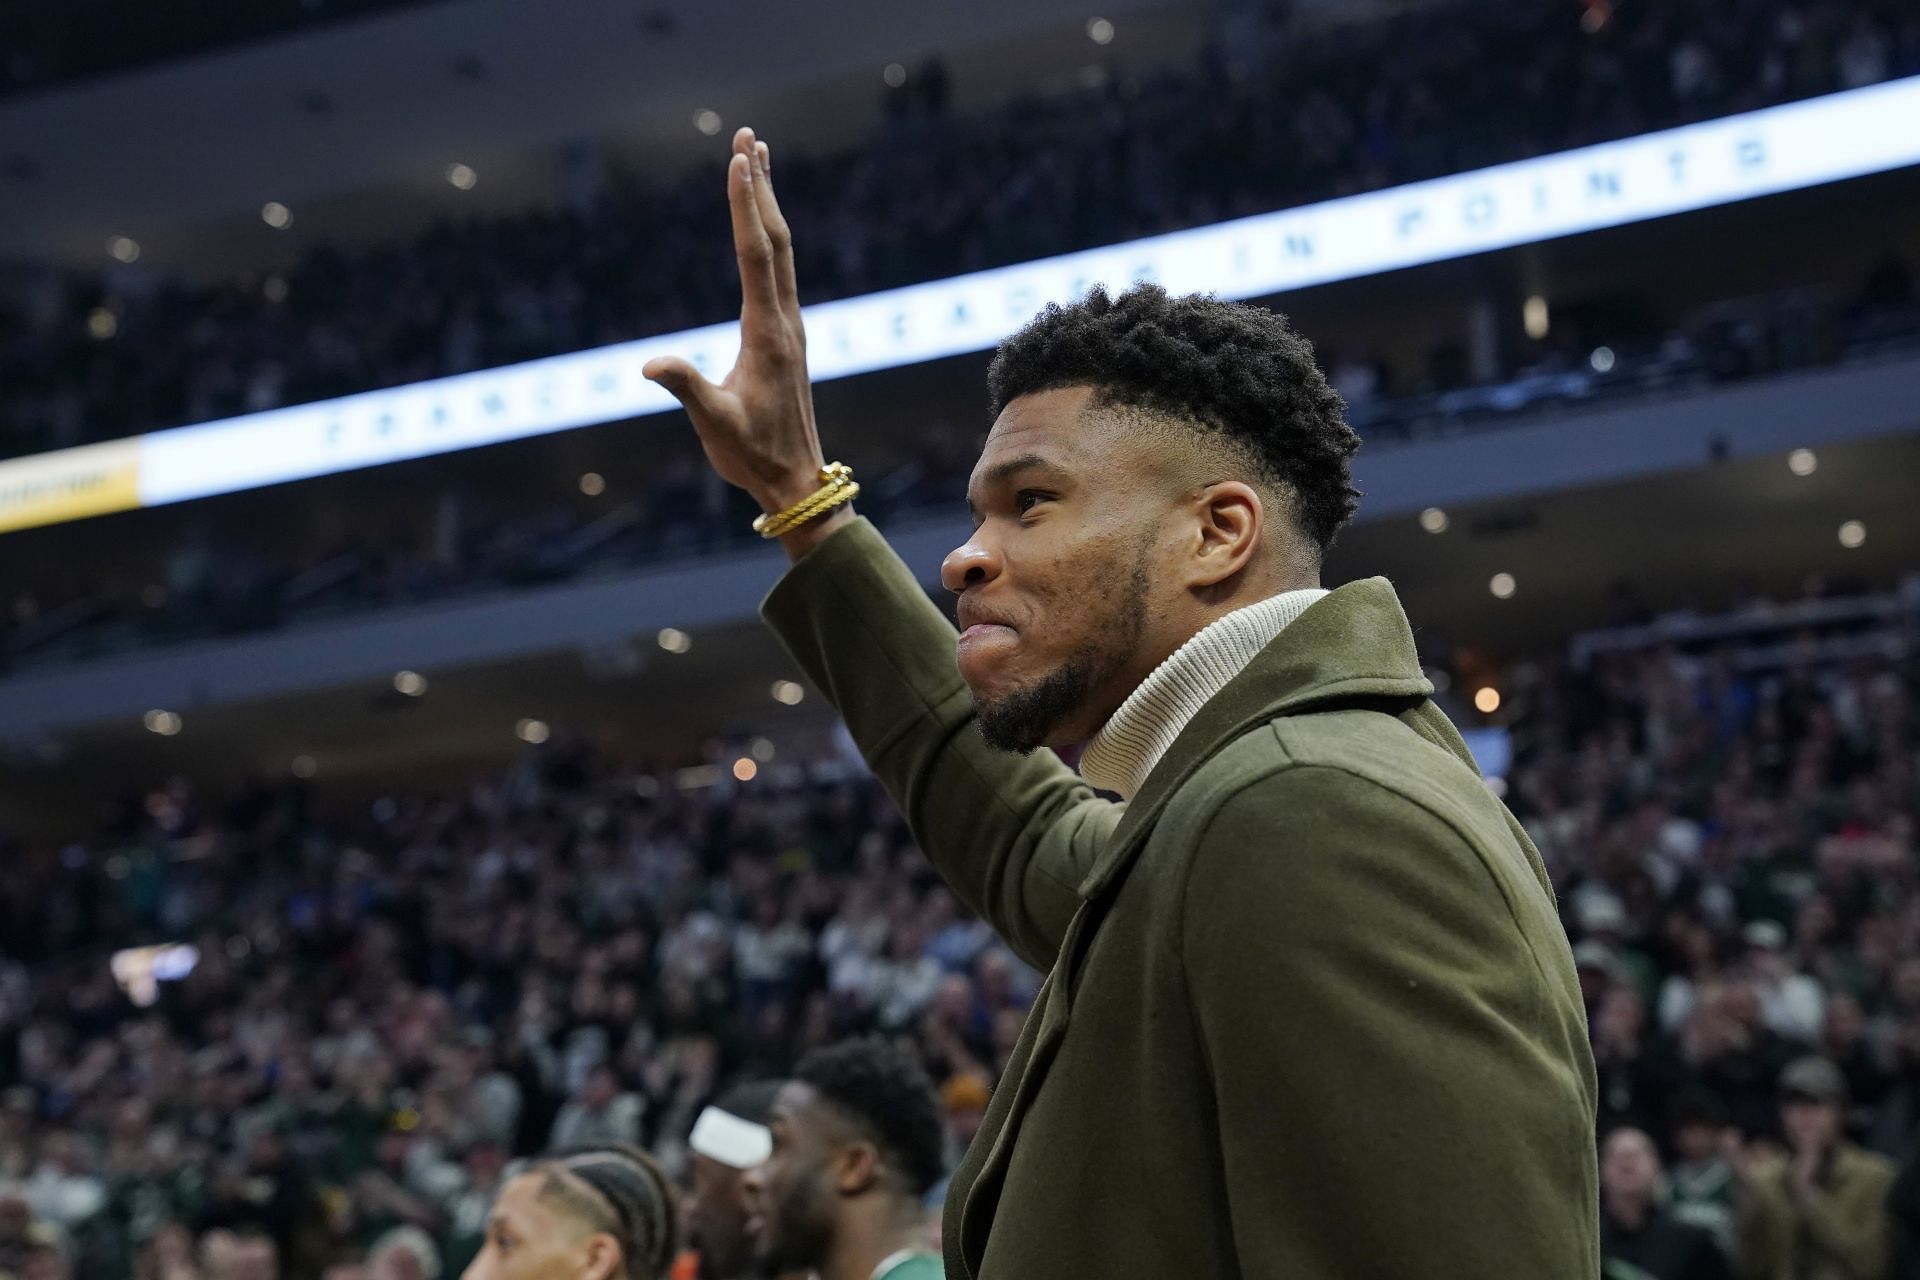 Giannis Antetokounmpo of the Milwaukee Bucks waves to the crowd as he is honored for passing Kareem Abdul-Jabbar&#039;s Bucks franchise mark of 14,211 points during a stoppage in play in the first half against the LA Clippers at Fiserv Forum on Friday in Milwaukee, Wisconsin.